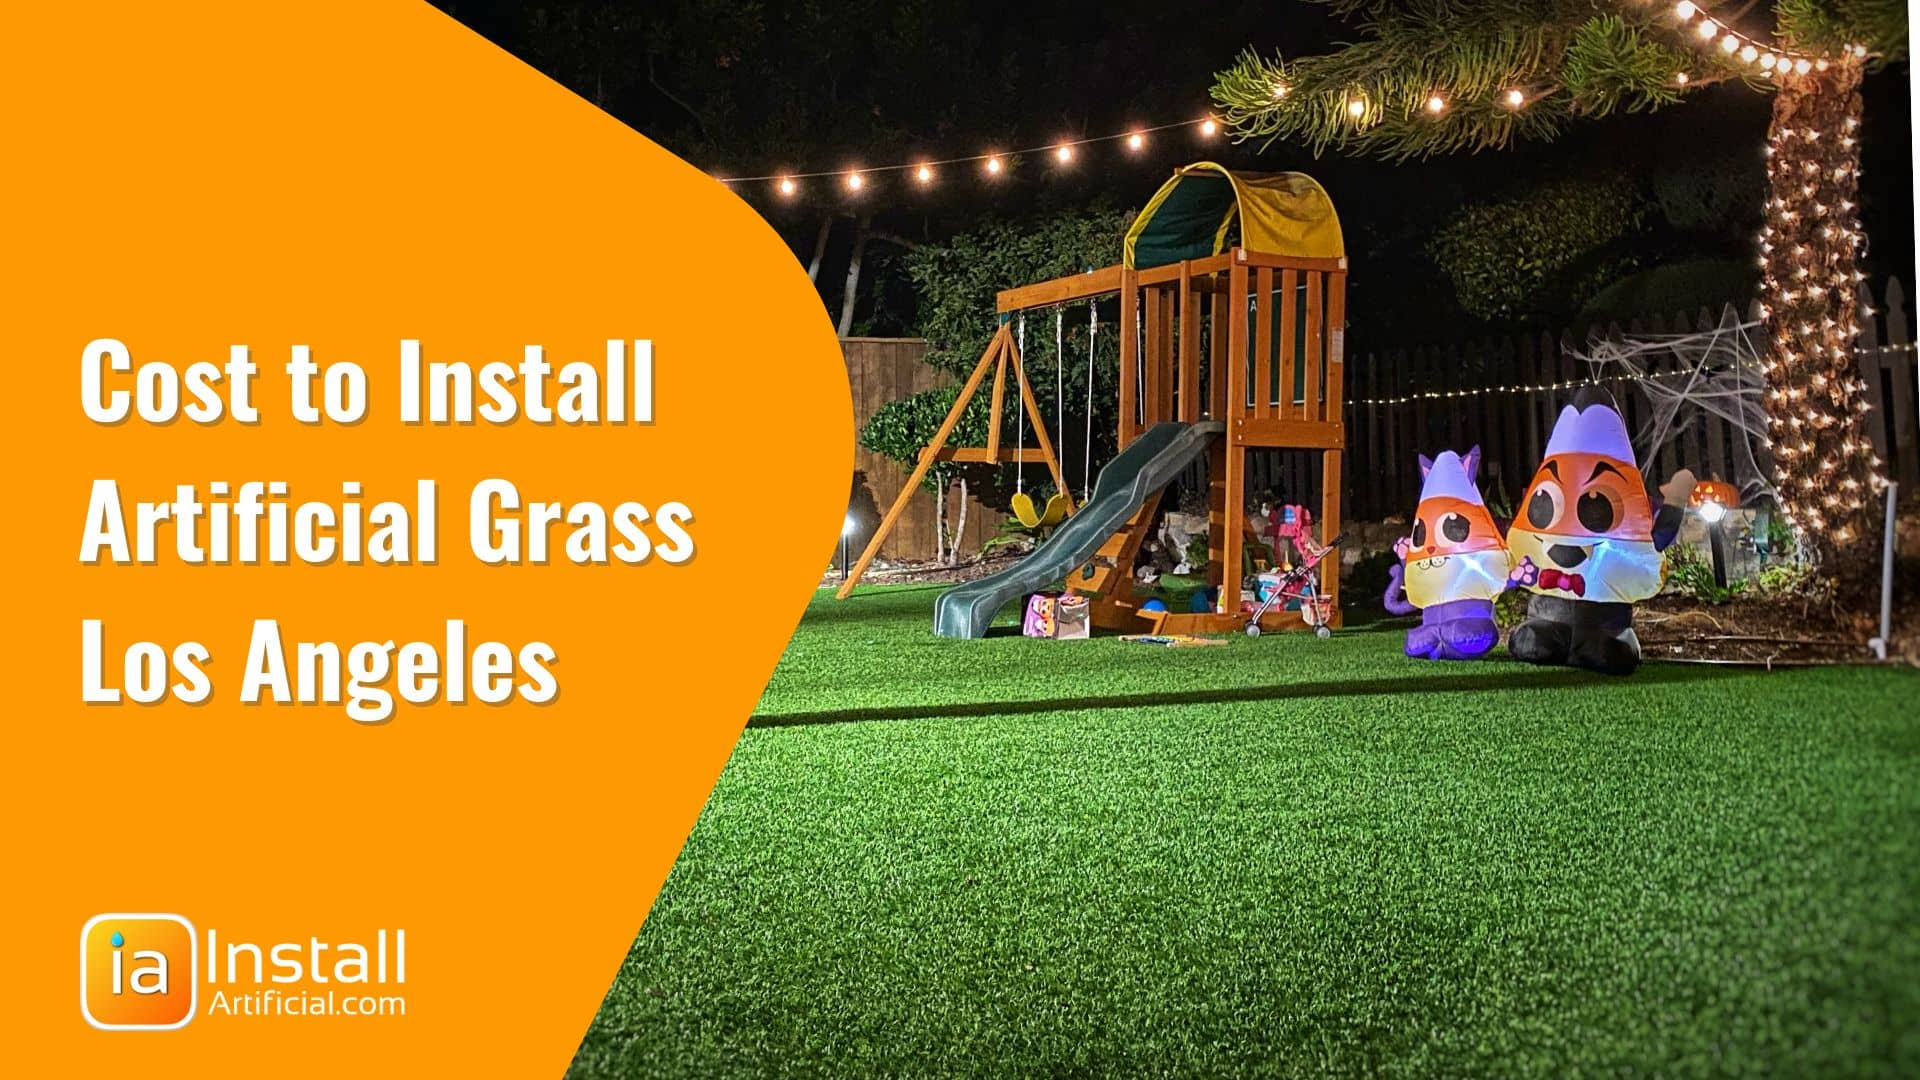 What's the Price of Artificial Grass in Los Angeles?